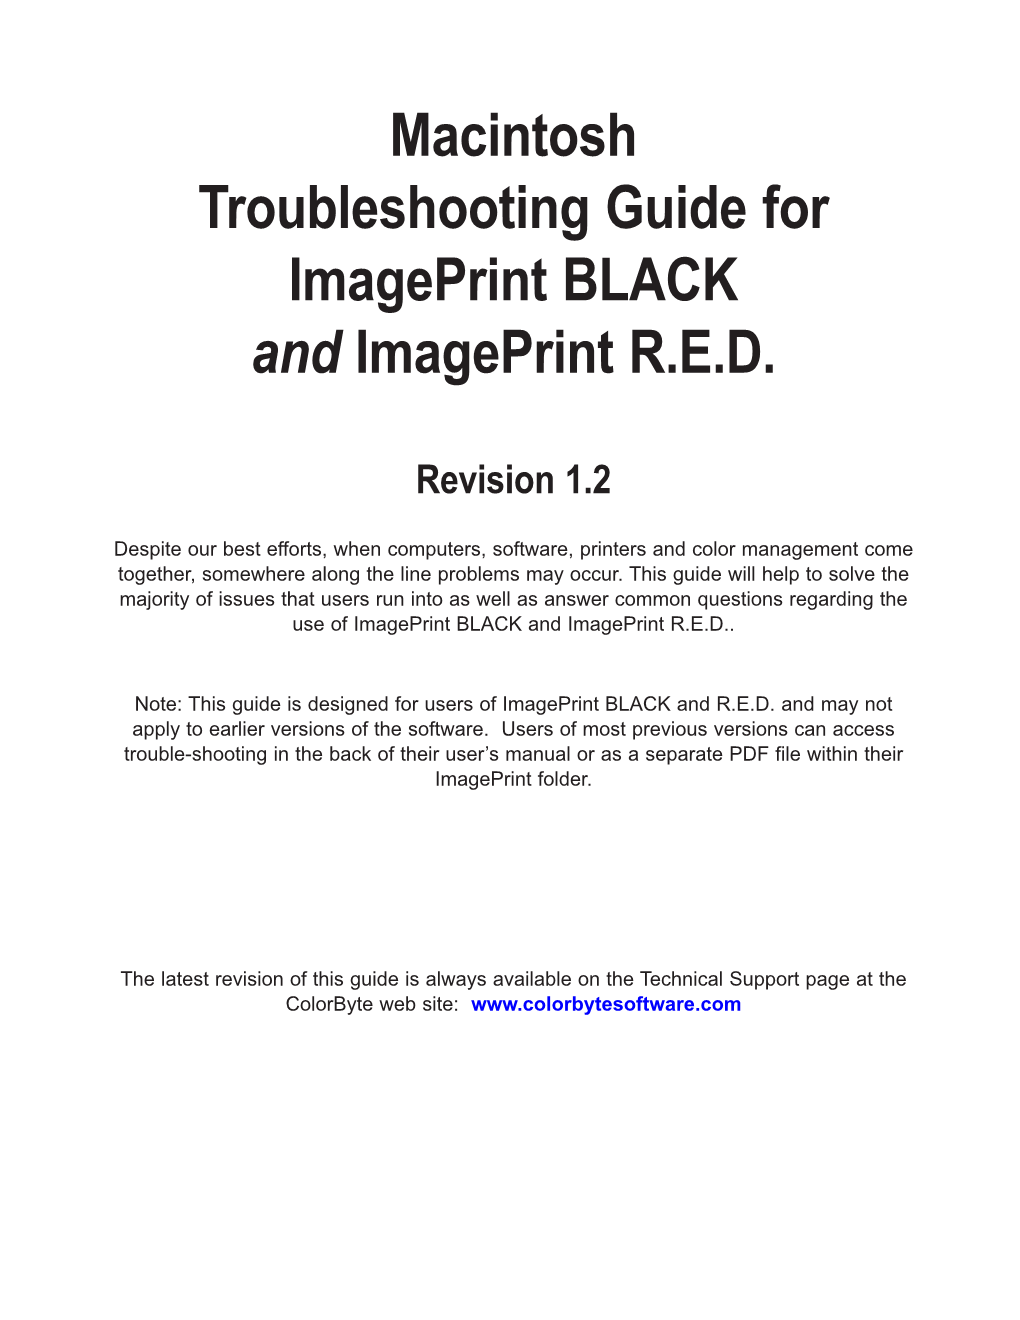 Macintosh Troubleshooting Guide for Imageprint BLACK and Imageprint R.E.D